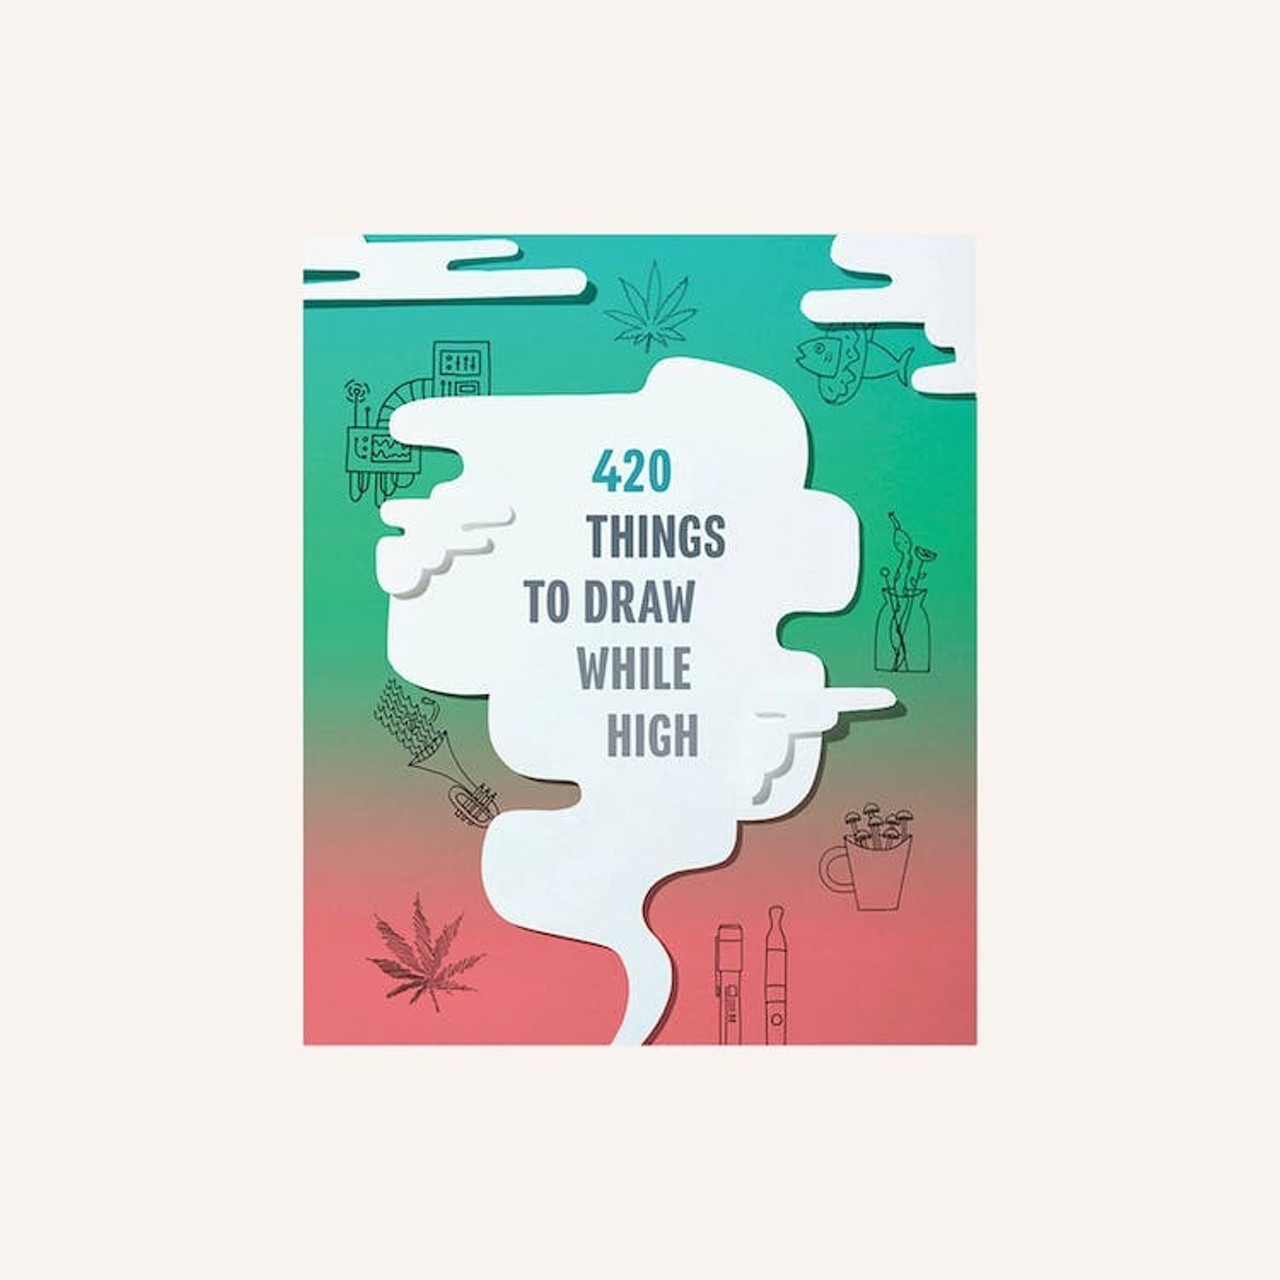 420 Things to Draw While High (Skymint) 
skymint.com 
This sketchbook offers 420 illustration prompts to get your creative juices flowing. Try it out for a plein-air sketching party.